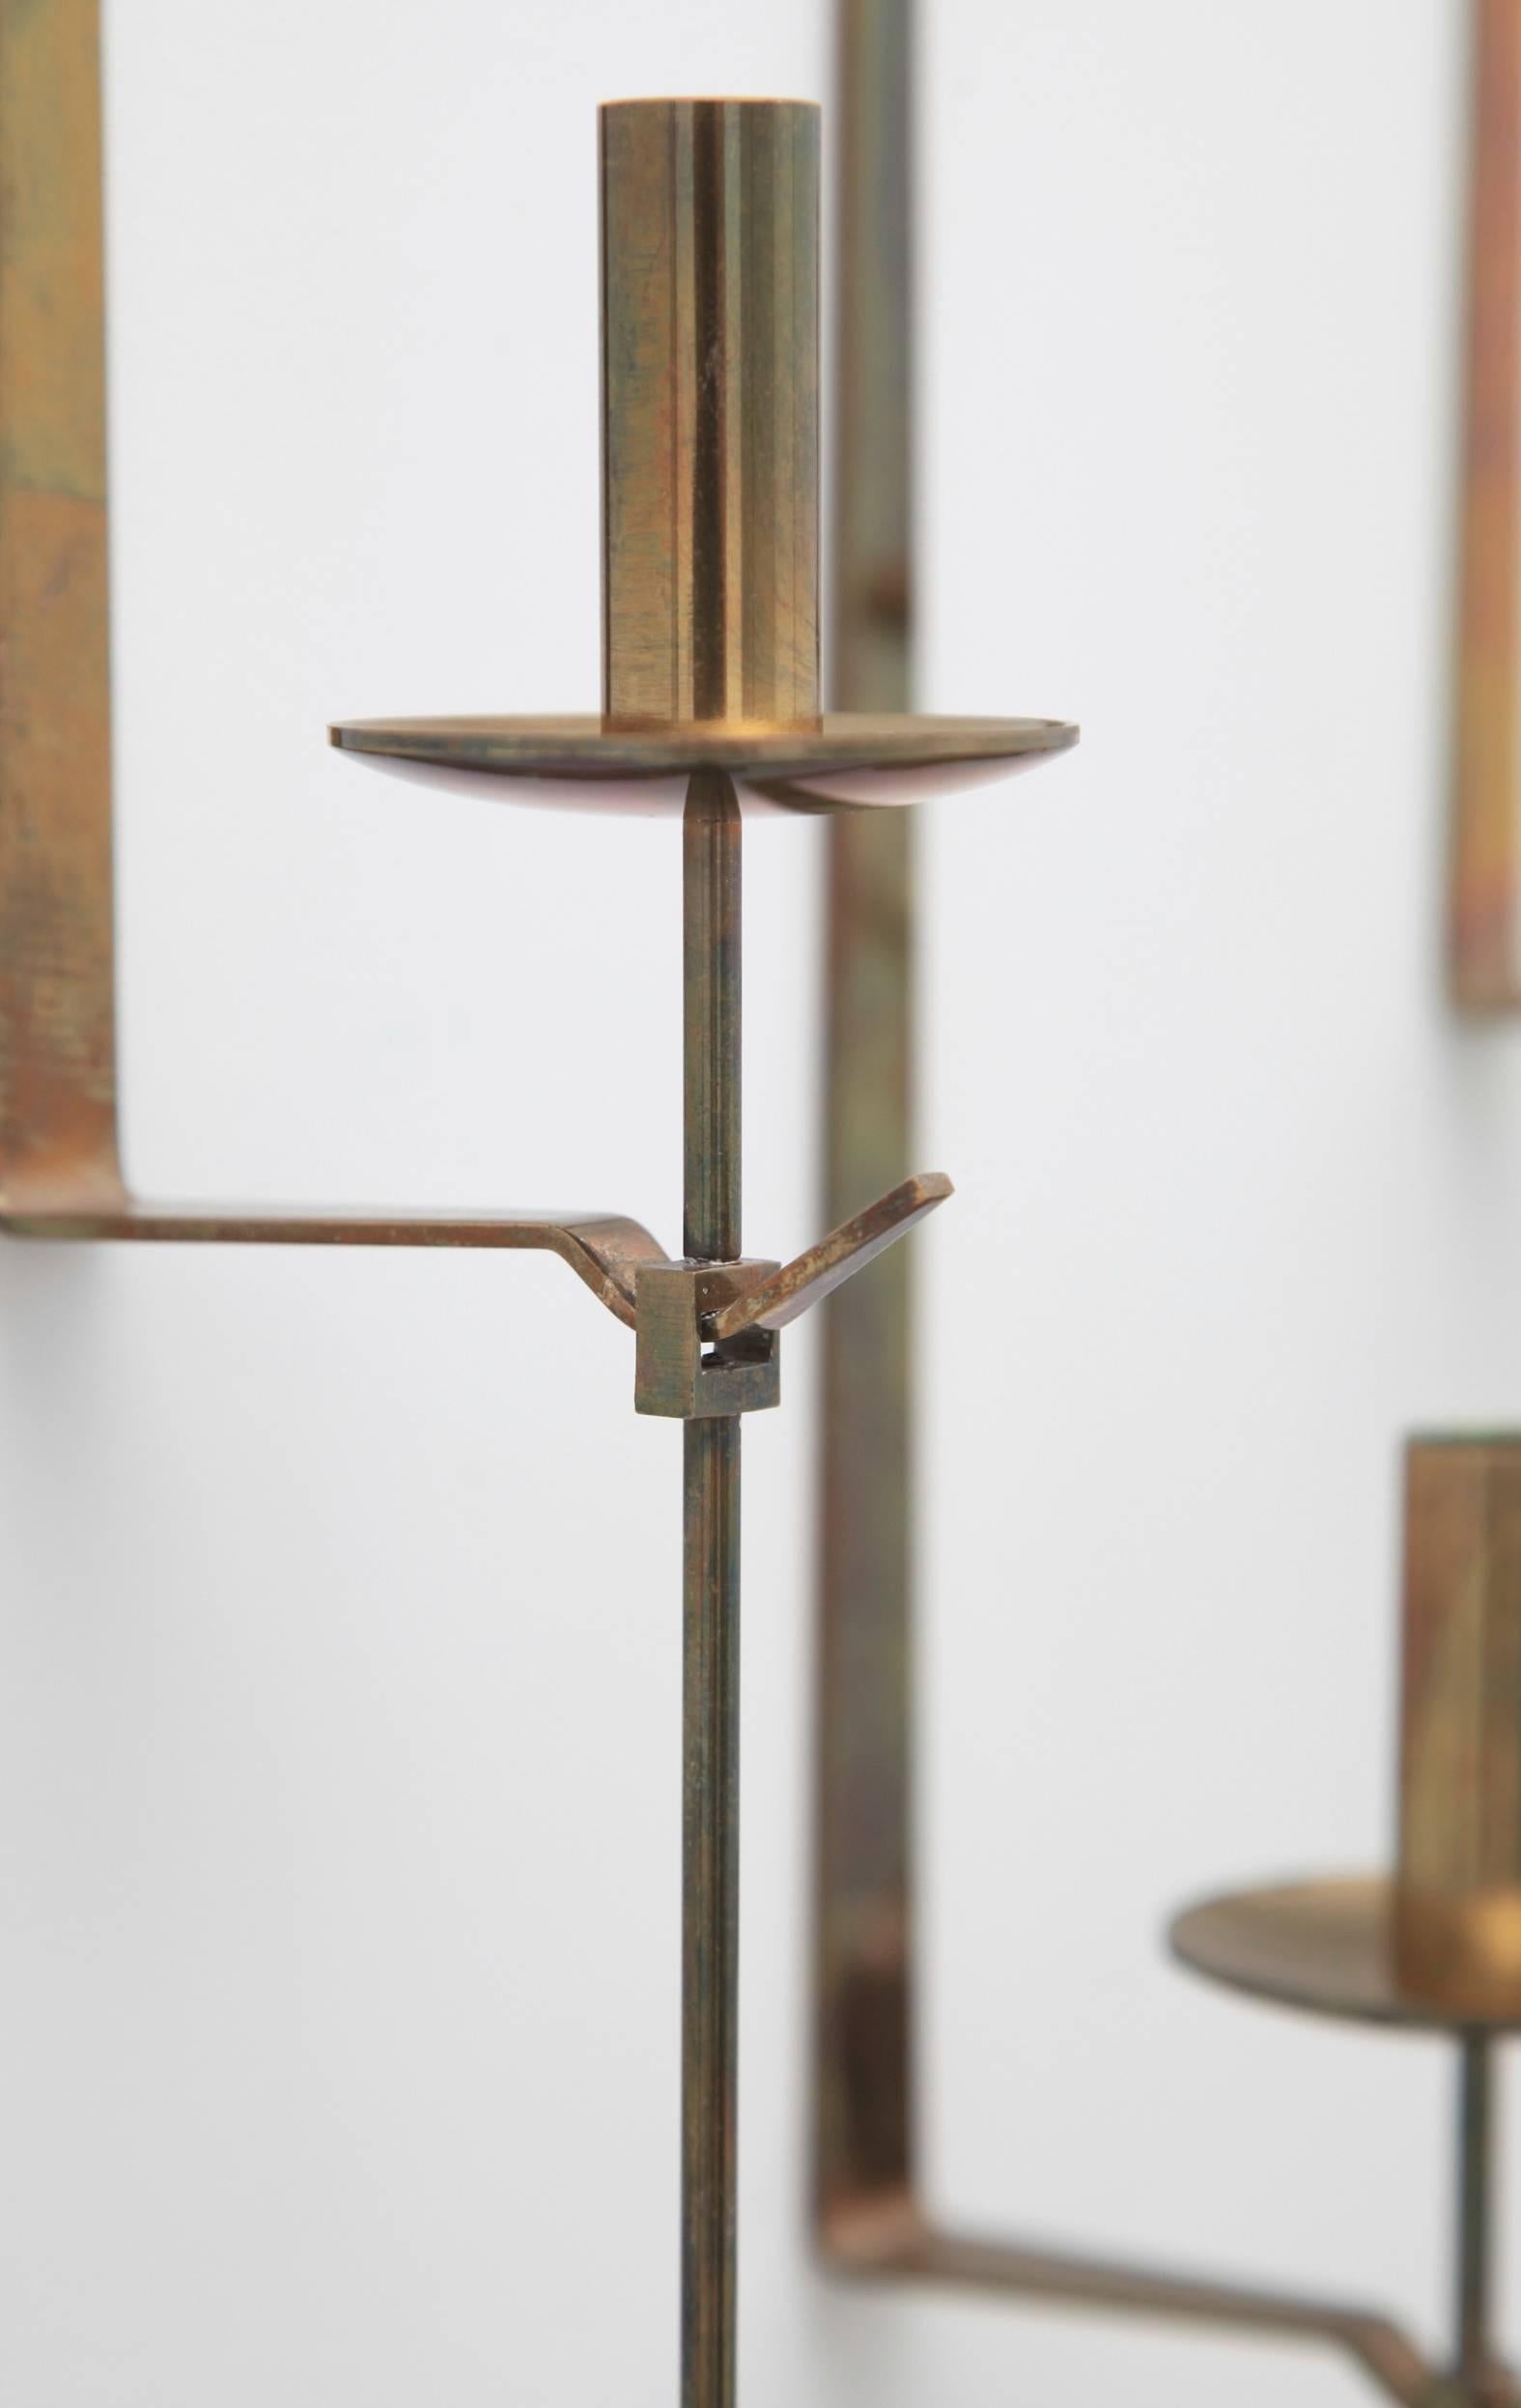 Wall Candleholders by Pierre Forssell, Skultuna, Sweden, 1950s (Messing)